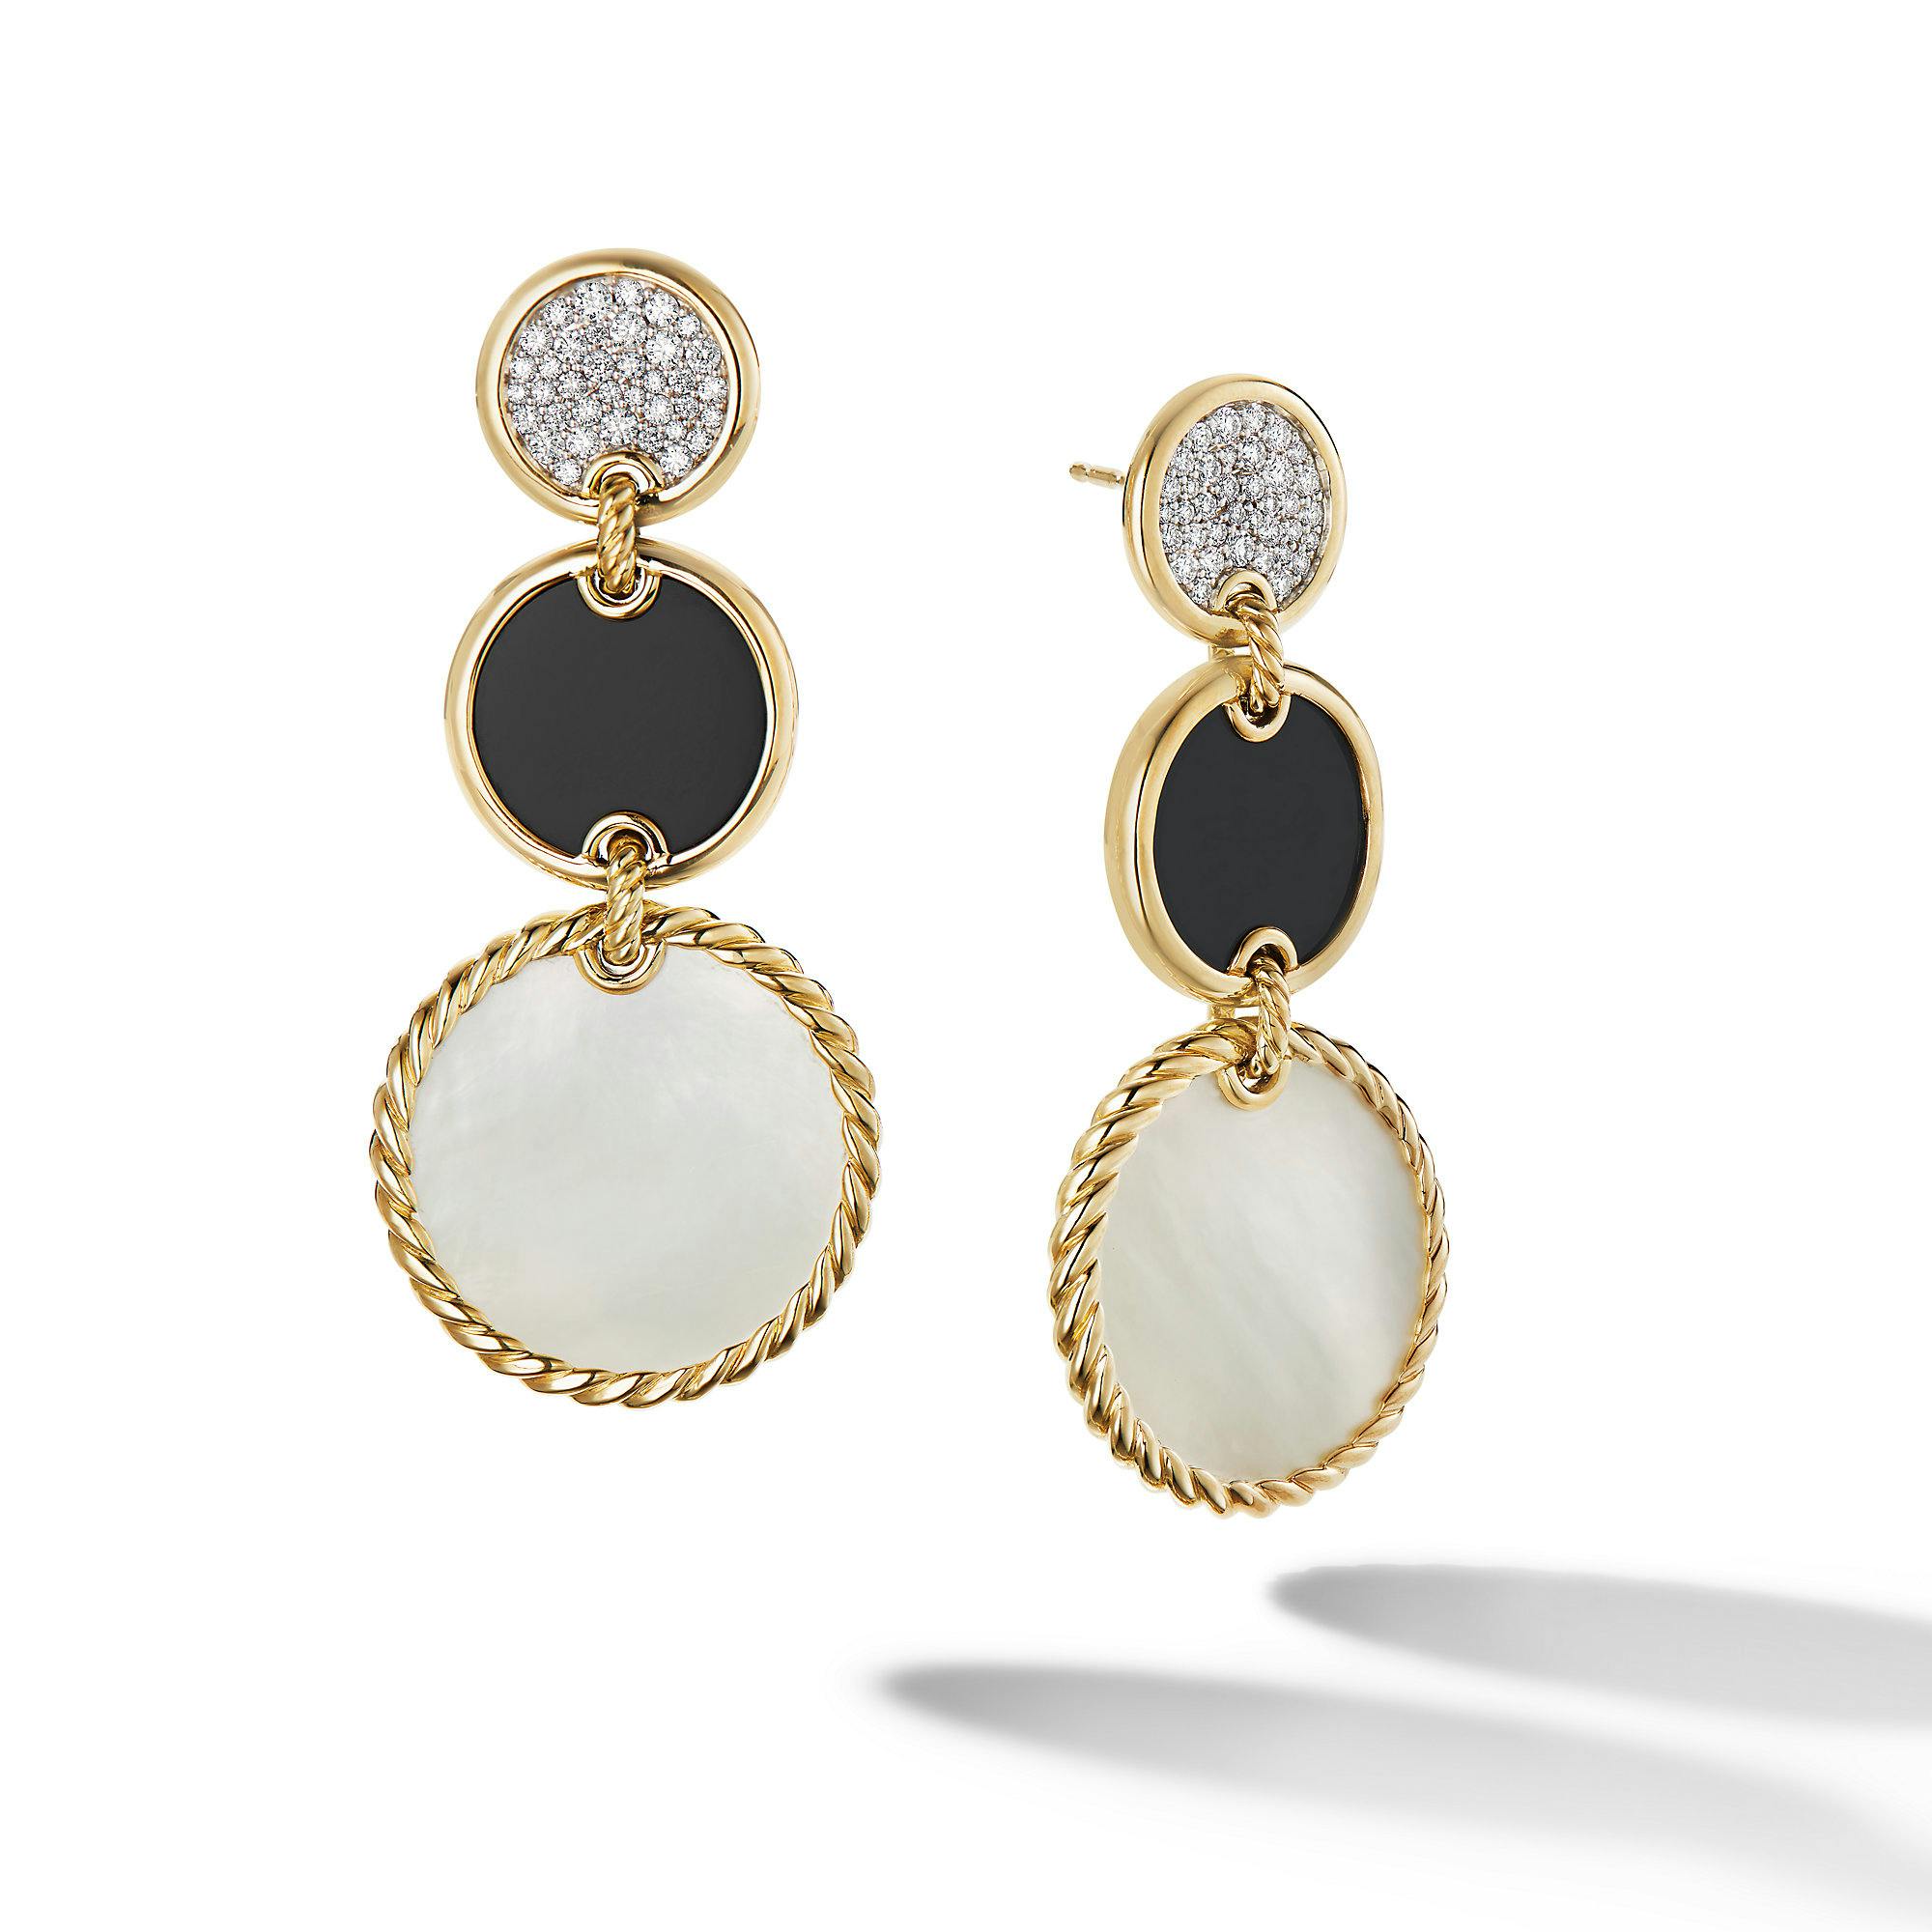 David Yurman DY Elements Triple Drop Earrings in 18K Yellow Gold with Mother of Pearl, Black Onyx and Pave Diamonds